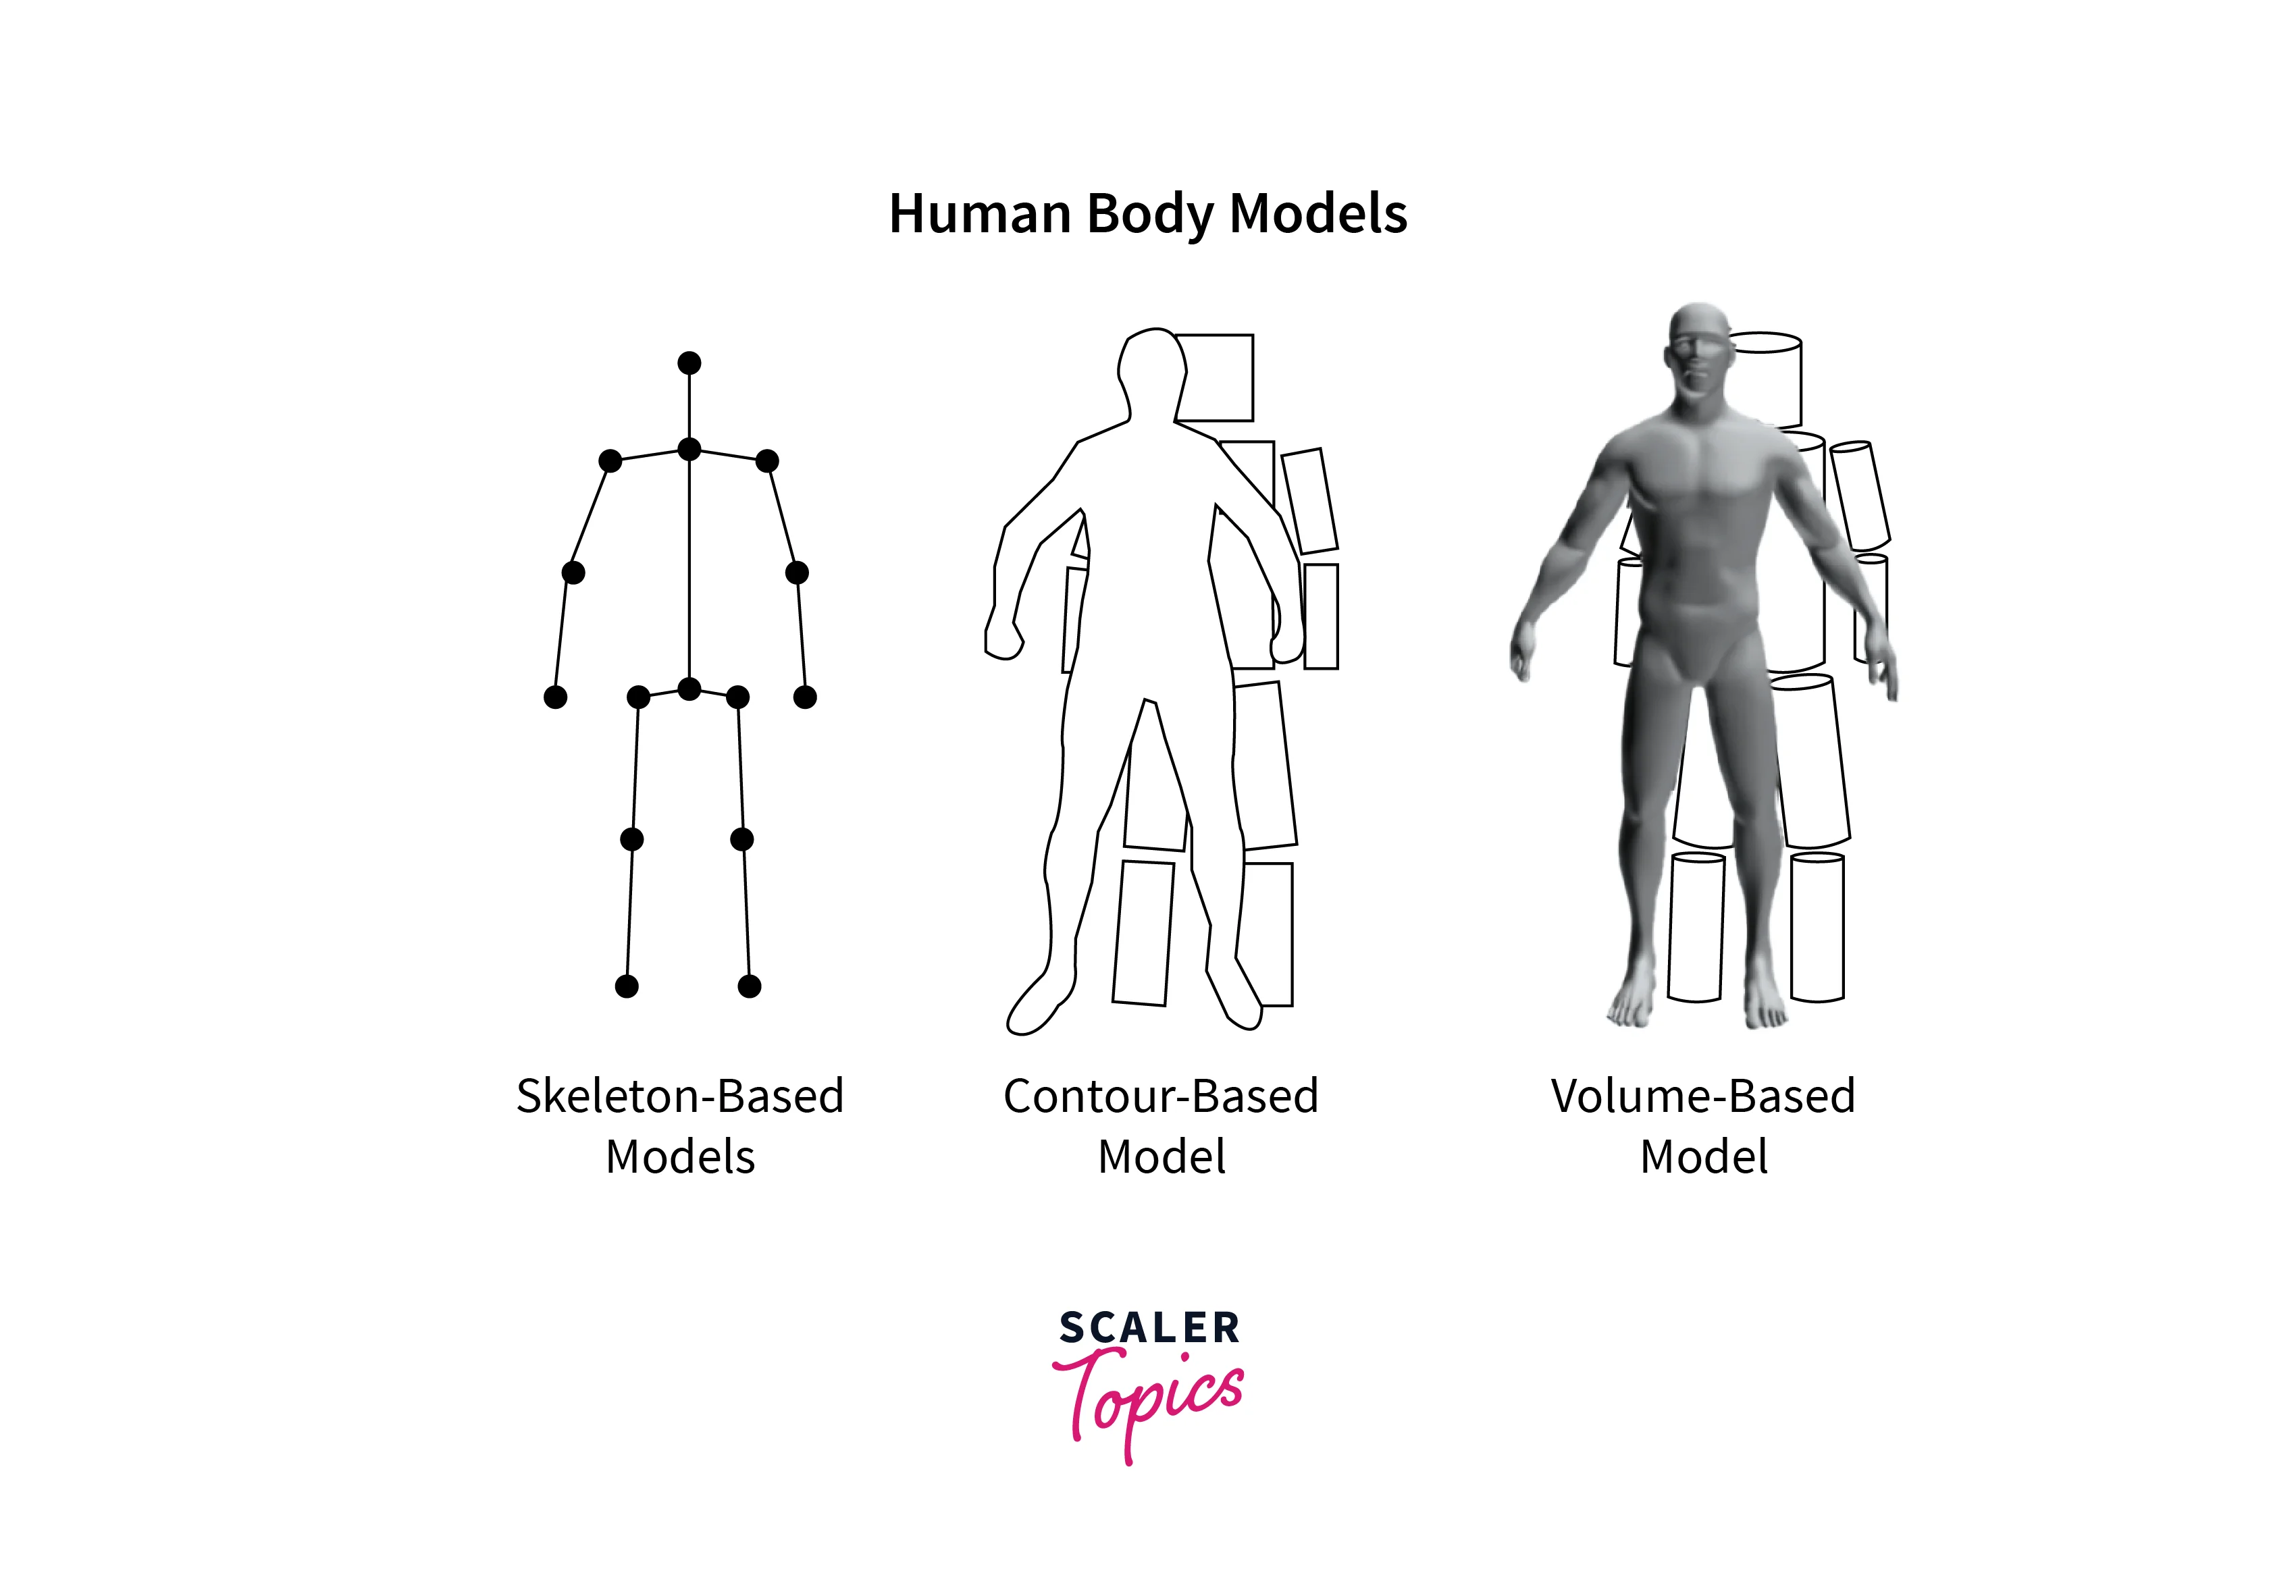 Meta AI Research: Quest 2 Body Pose Estimation Without Trackers